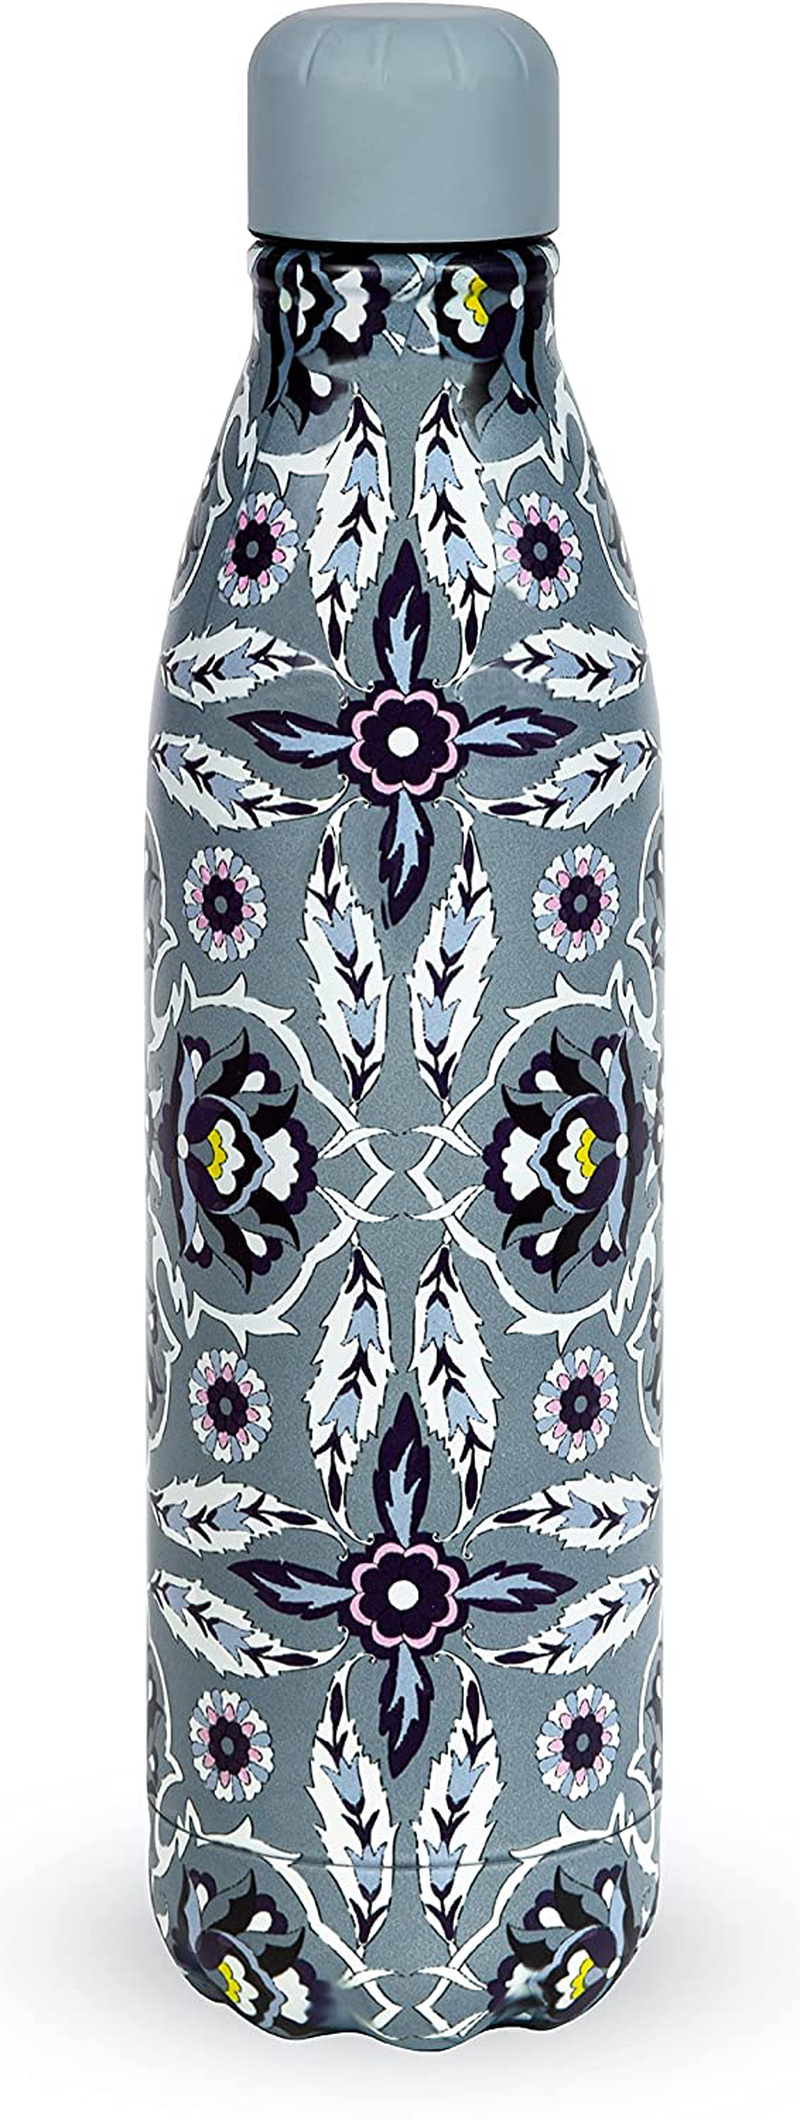 Vera Bradley Stainless Steel Insulated Water Bottle, 17 Ounce Travel Tumbler with Lid for Sports, Gym, School